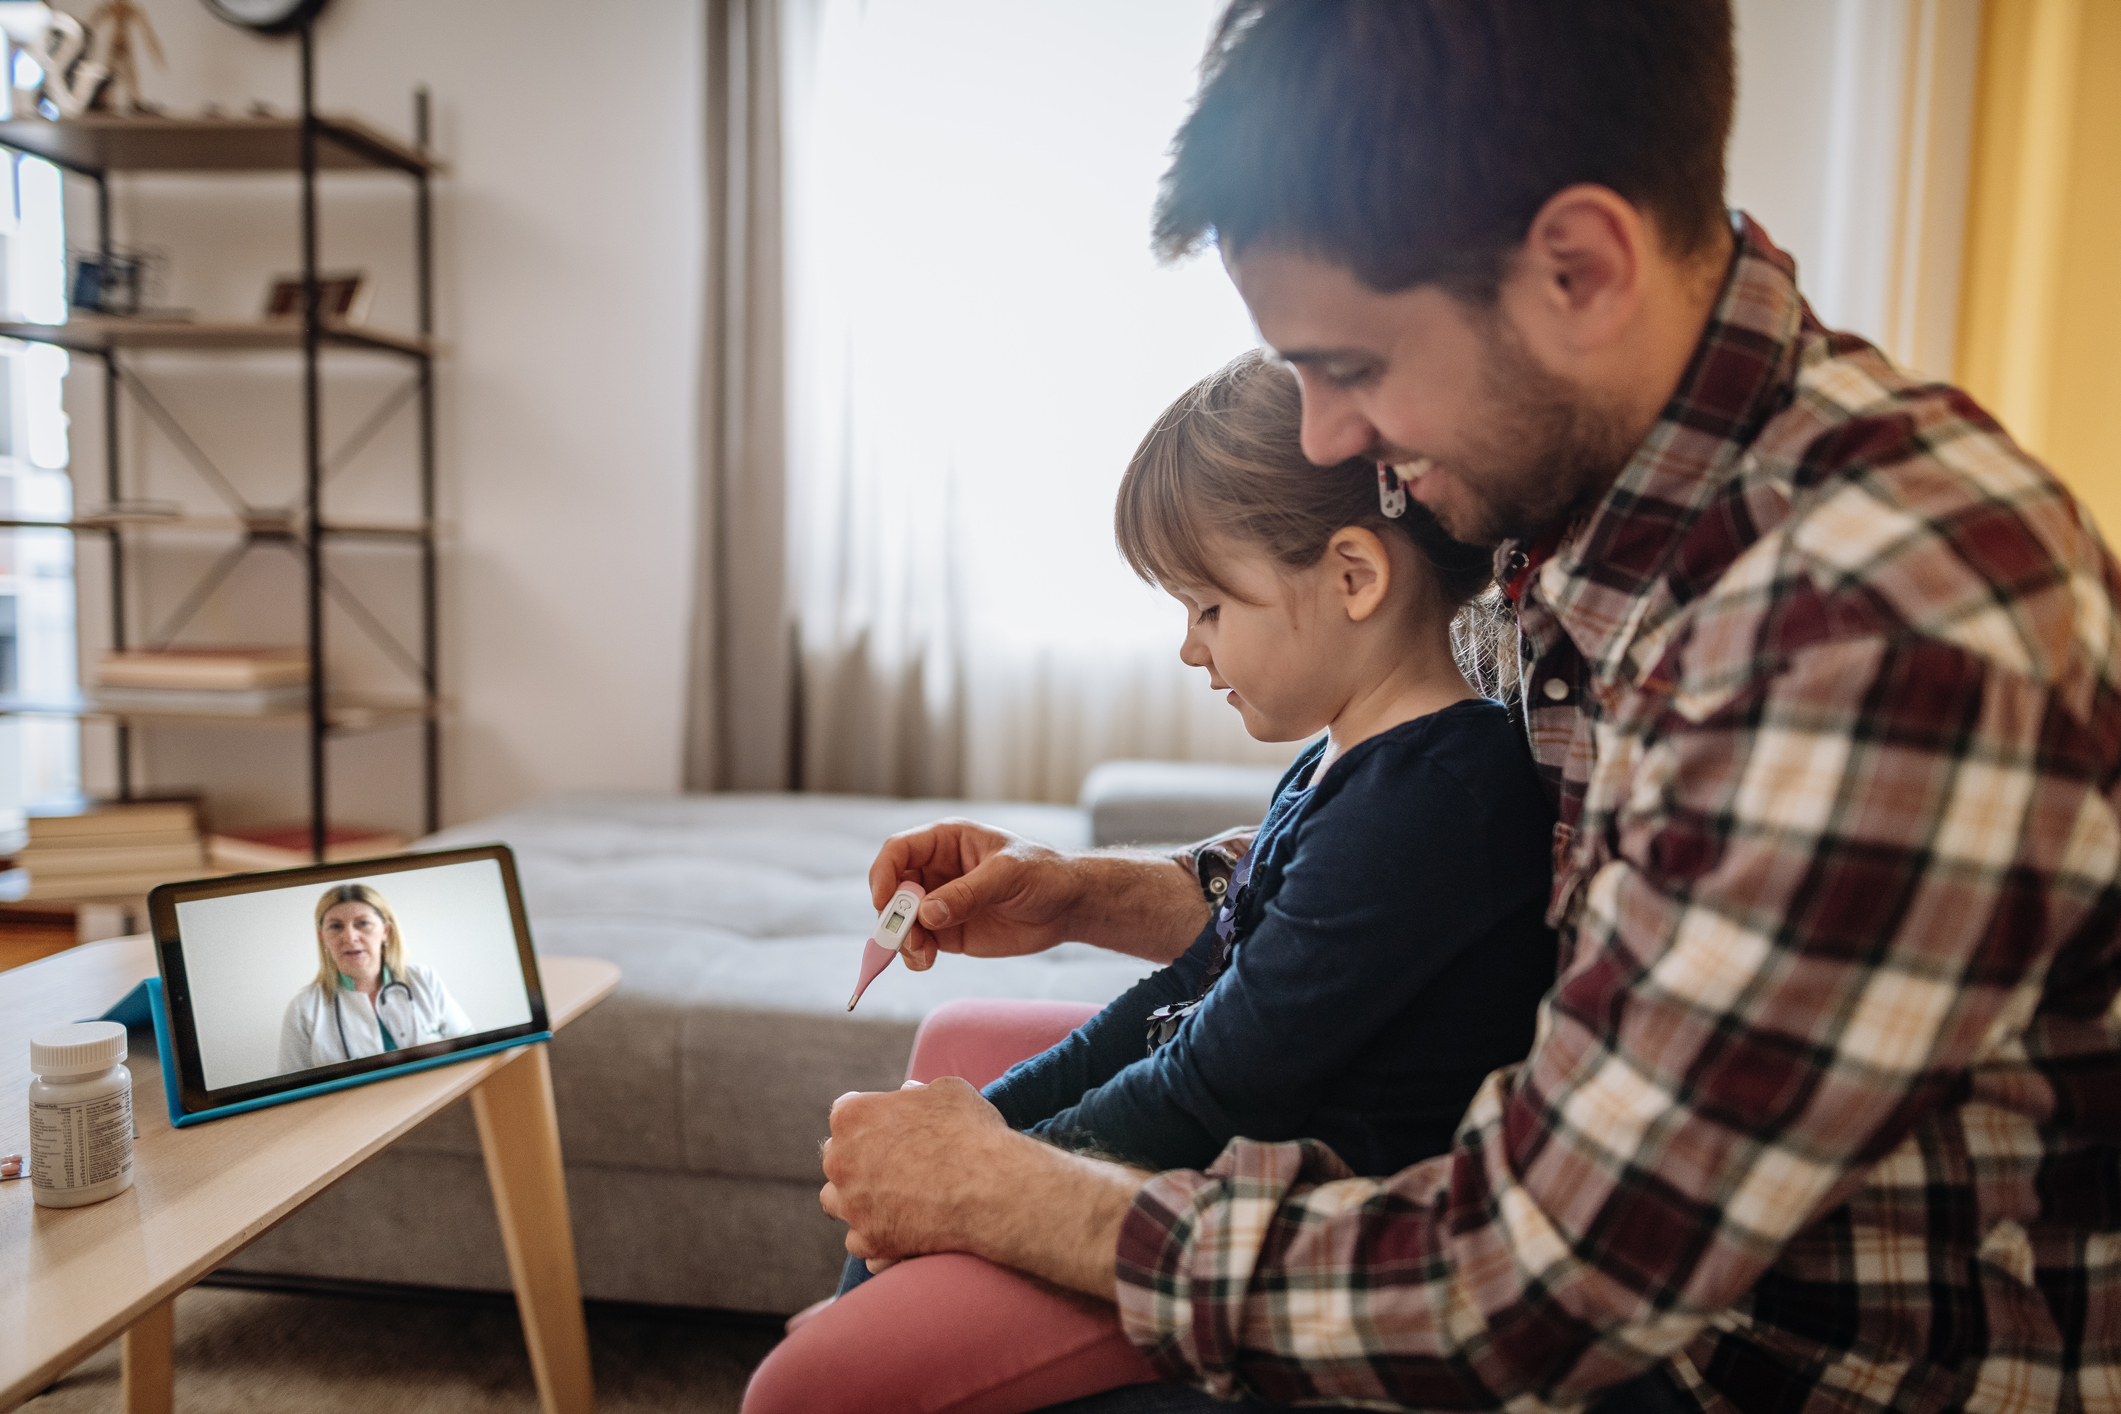 father-and-son-having-virtual-visit-with-doctor-on-tablet-computer_istock-1311113570.jpg